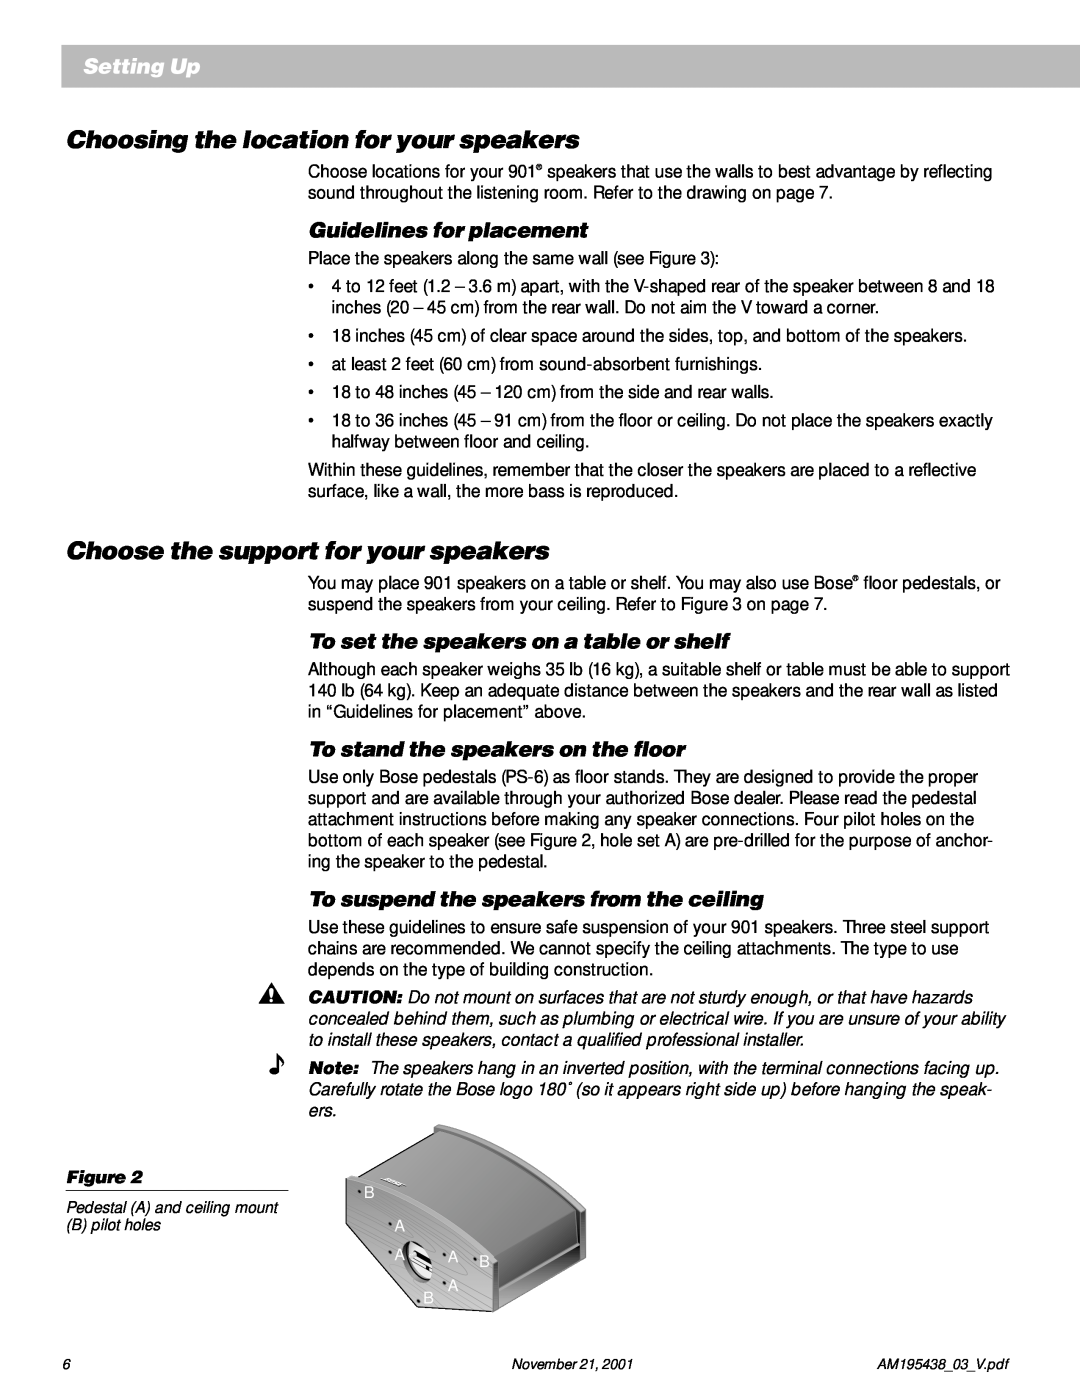 Bose 901 Setting Up, Guidelines for placement, To set the speakers on a table or shelf, To stand the speakers on the floor 